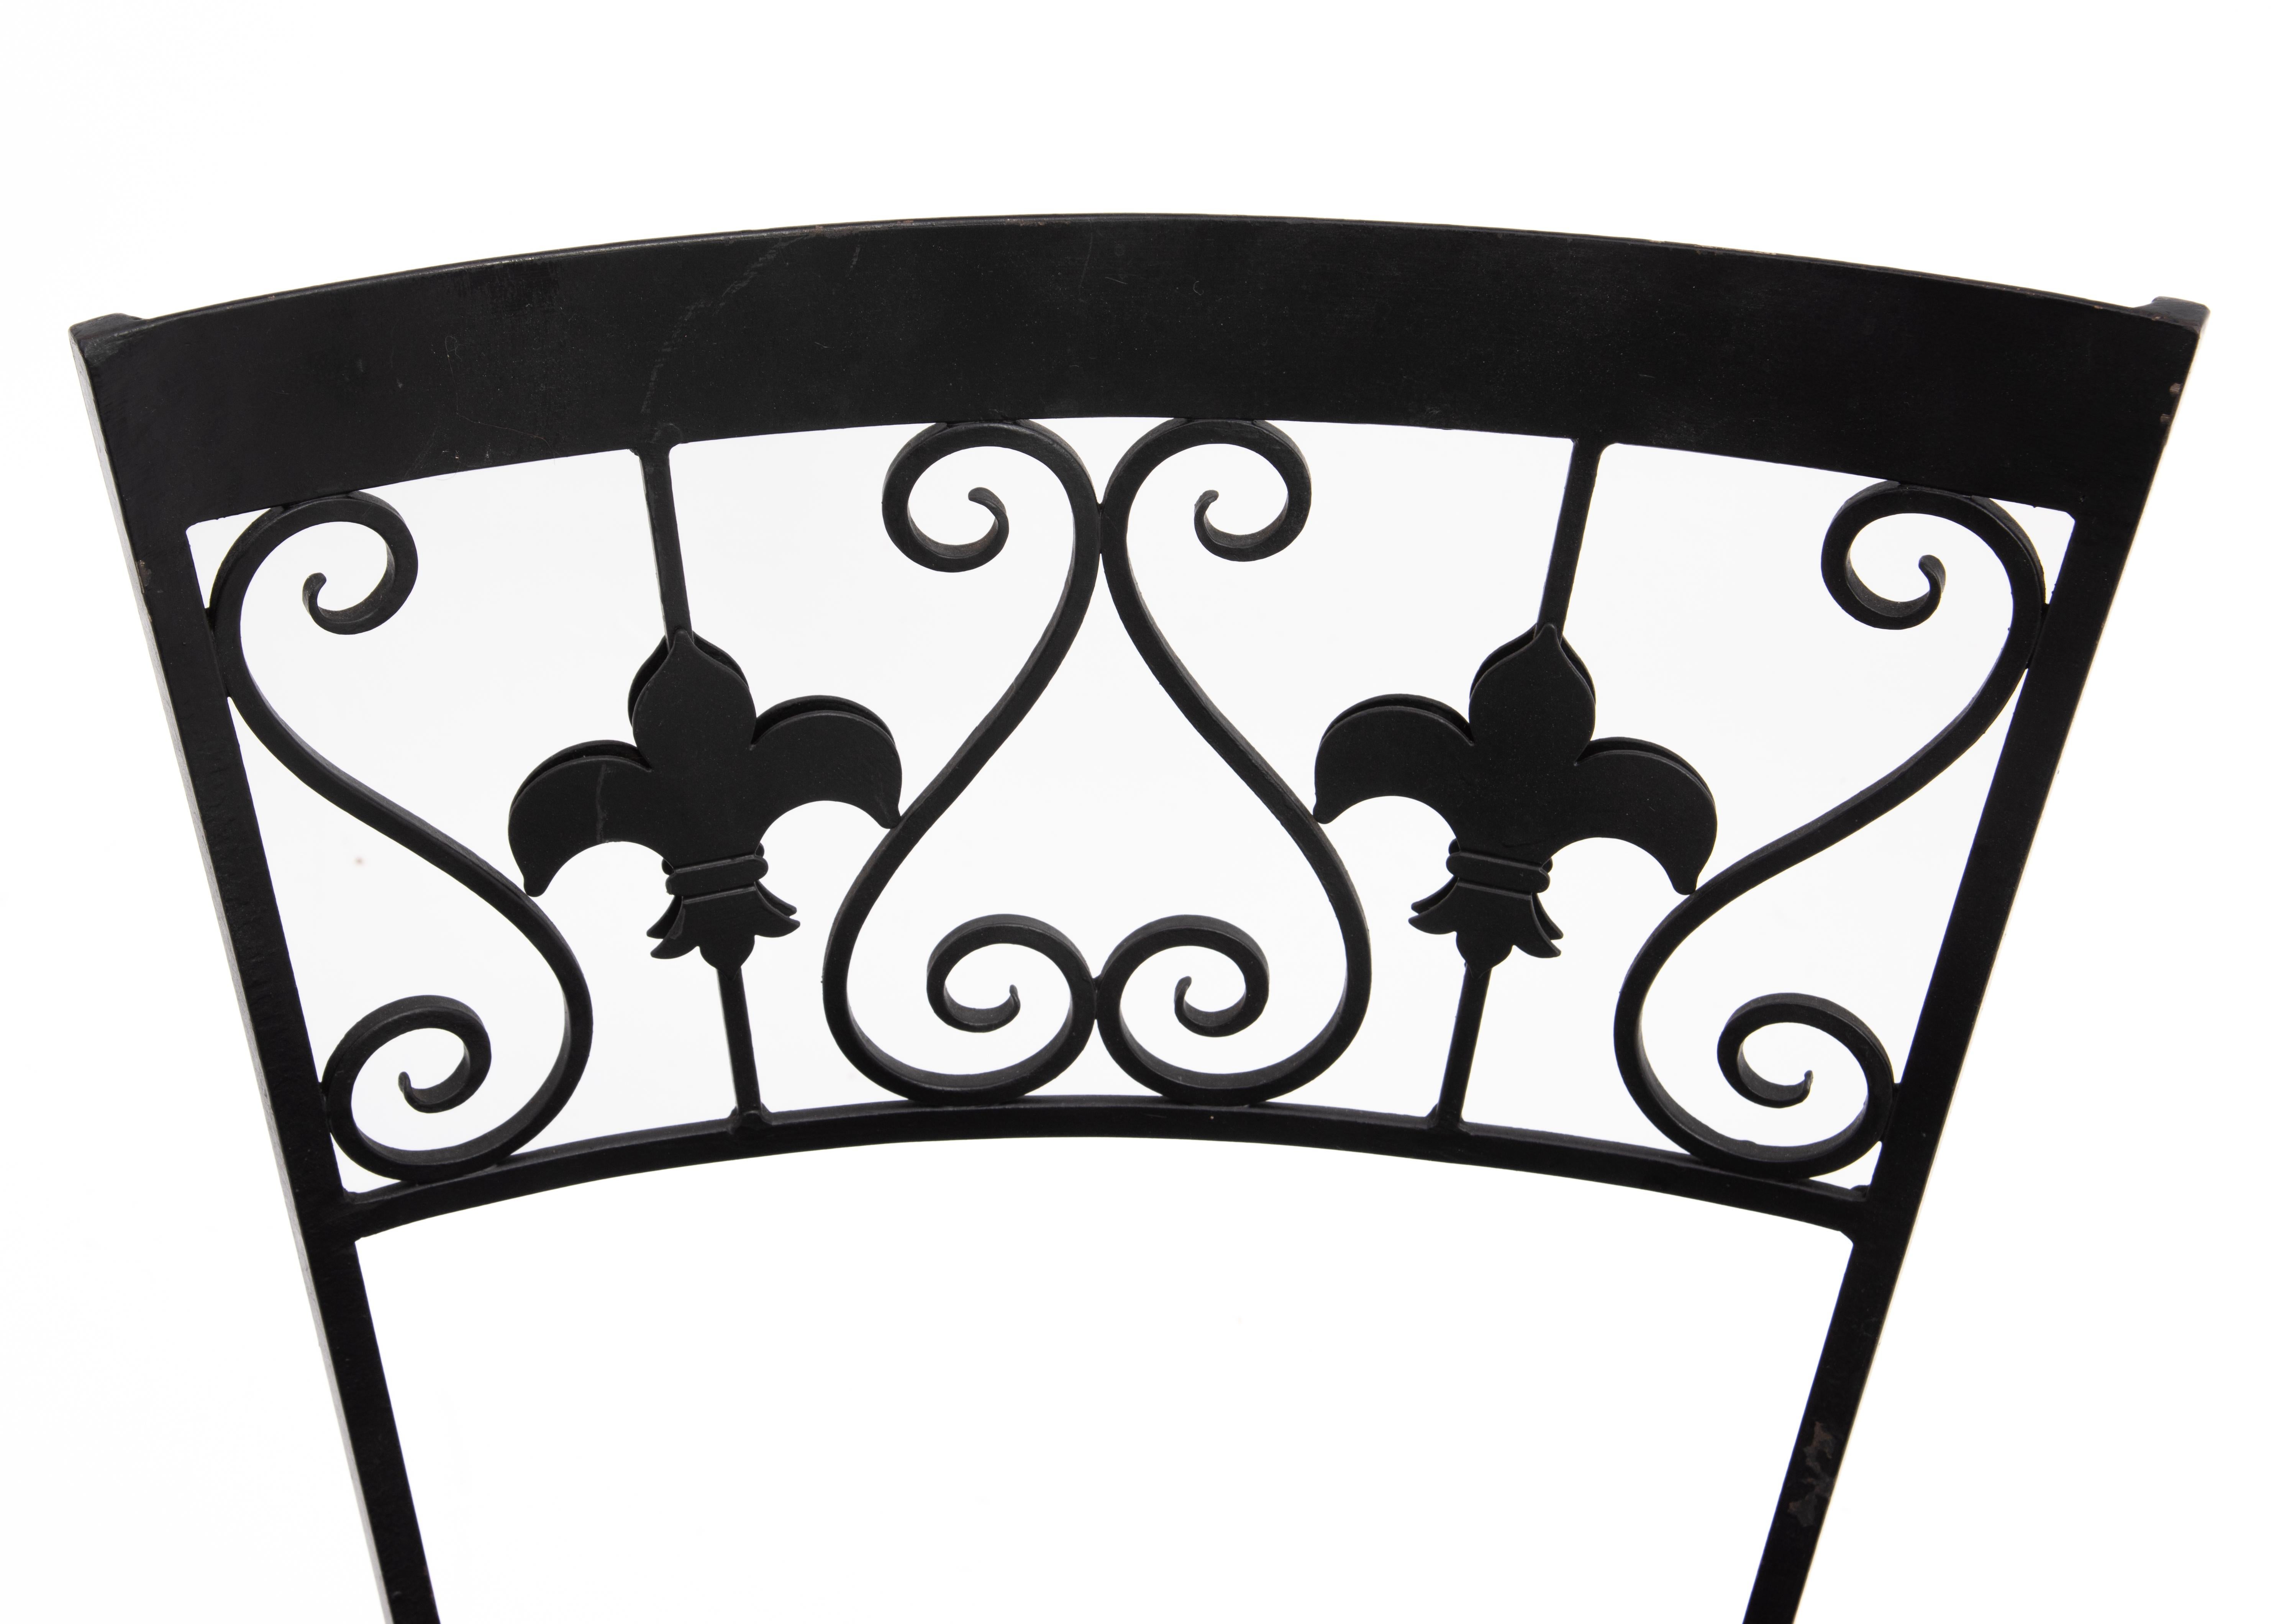 Hollywood Regency Wrought Iron Fleur-De-Lis Dining Chairs 1960s - a Set of 6 For Sale 4